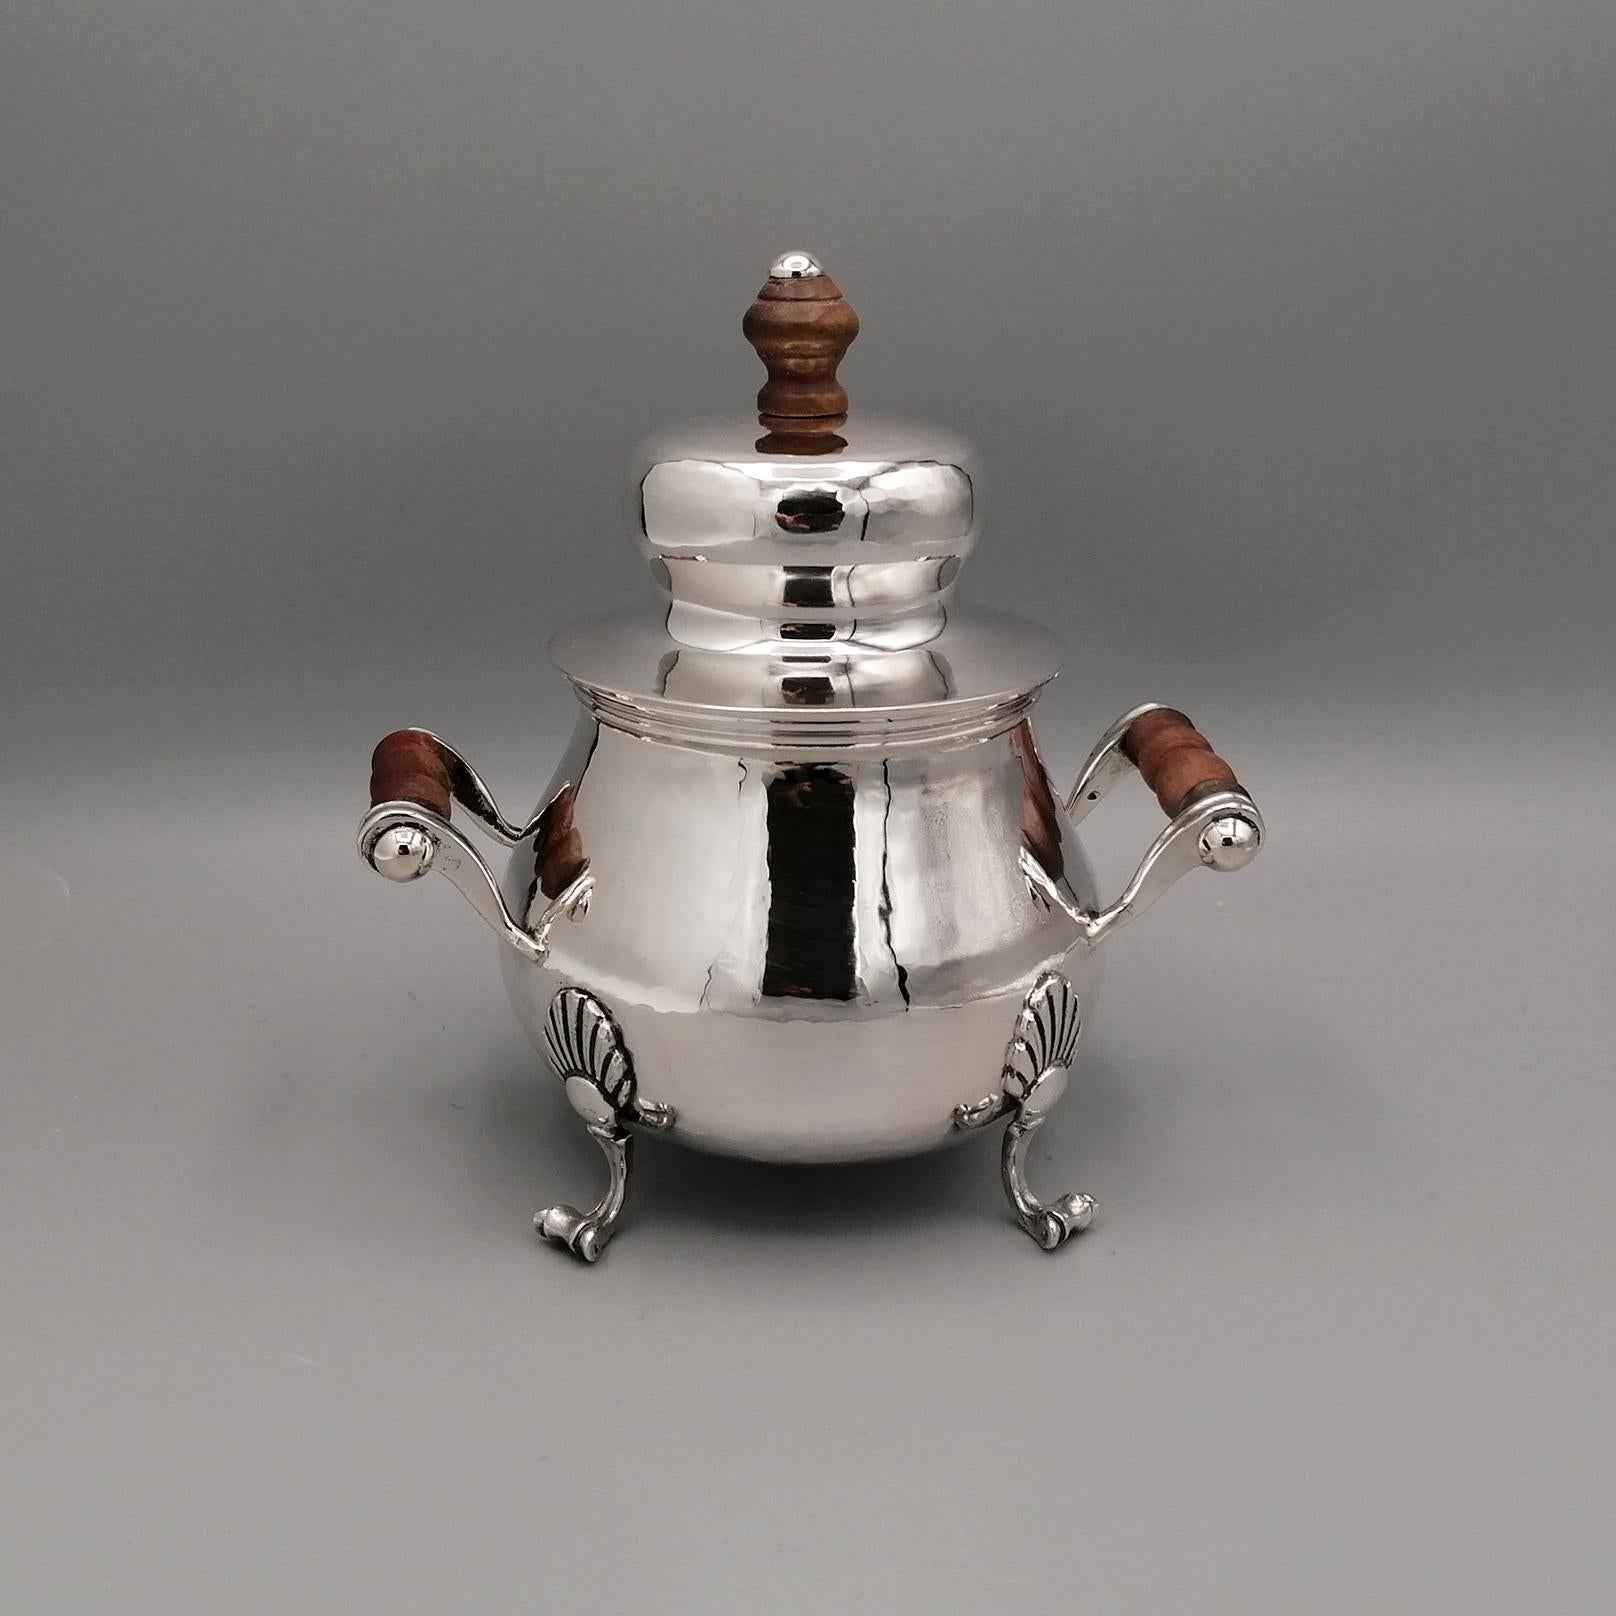 The sugar bowl was made entirely by hand in hammered and shaped 800 silver in the late 18th century style.
The horizontal handles, embellished with a wood finish, were made with the fusion technique.
Even the 4 feet, which allow the stability and